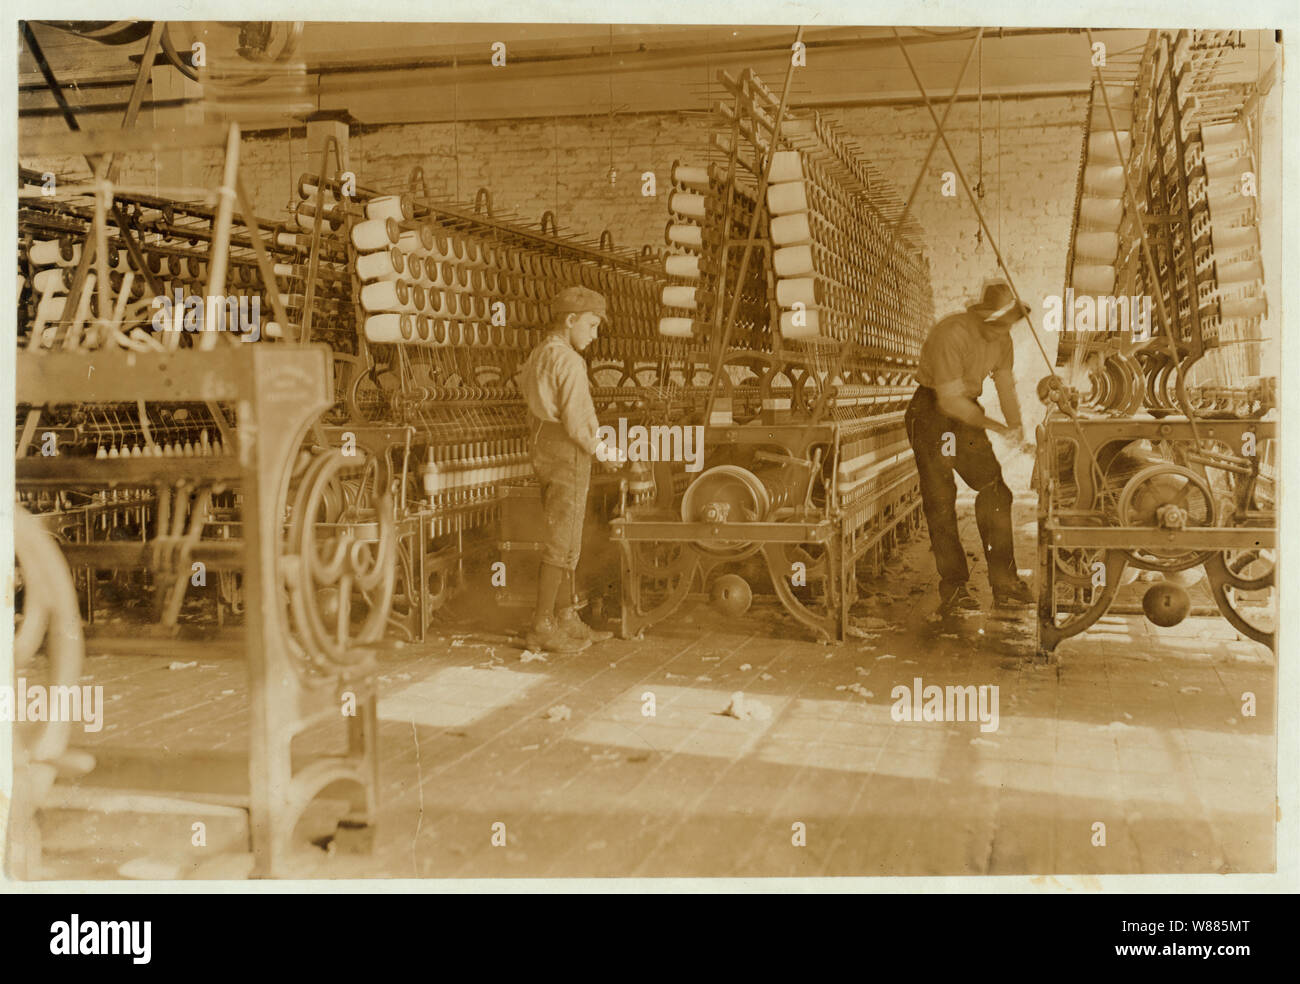 A doffer in the Melville Mfg. Co., Cherryville, N.C. Stock Photo